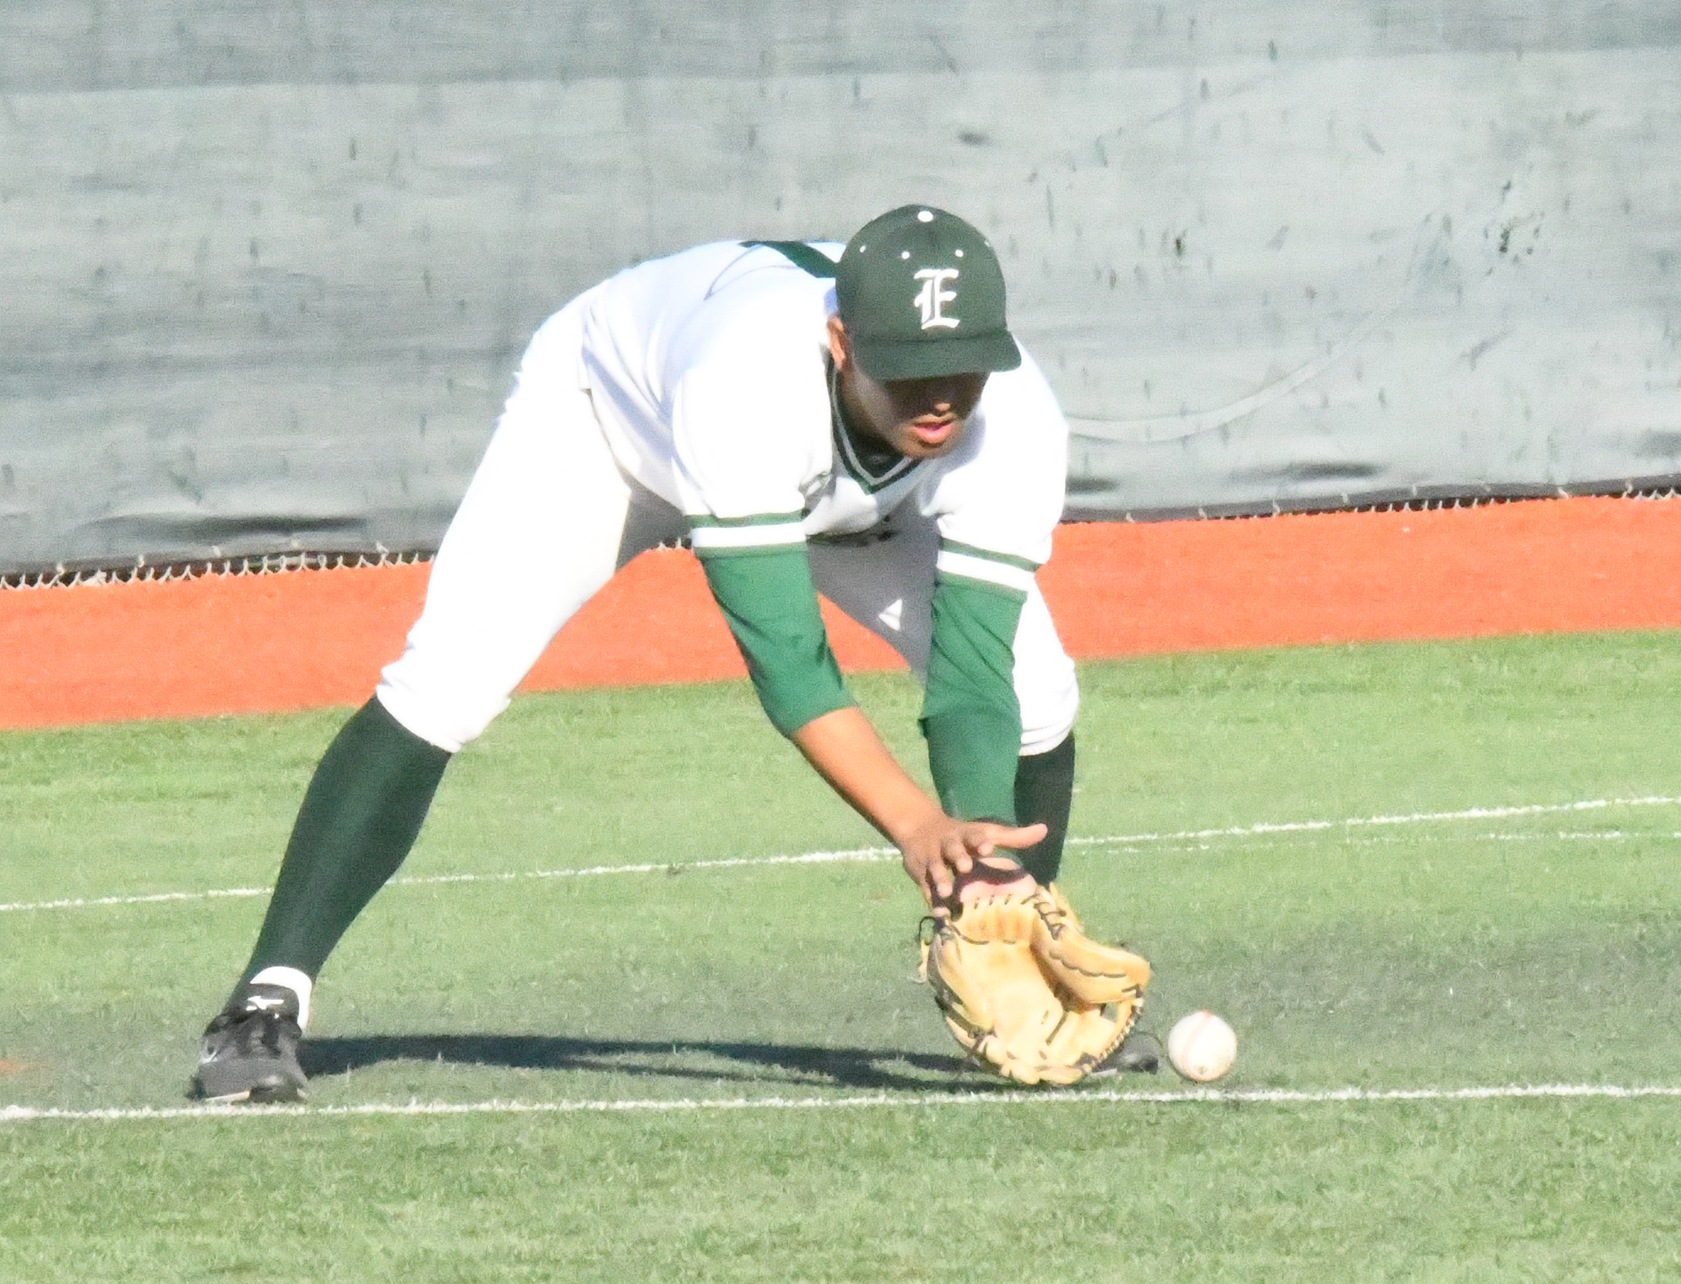 East Los Angeles College freshman Matthew Sosa works on defense in a come from behind 3-2, 10-hit win vs. Citrus College. Sosa hit the game winning RBI in the bottom of the 11th inning. (Photo by DeeDee Jackson)